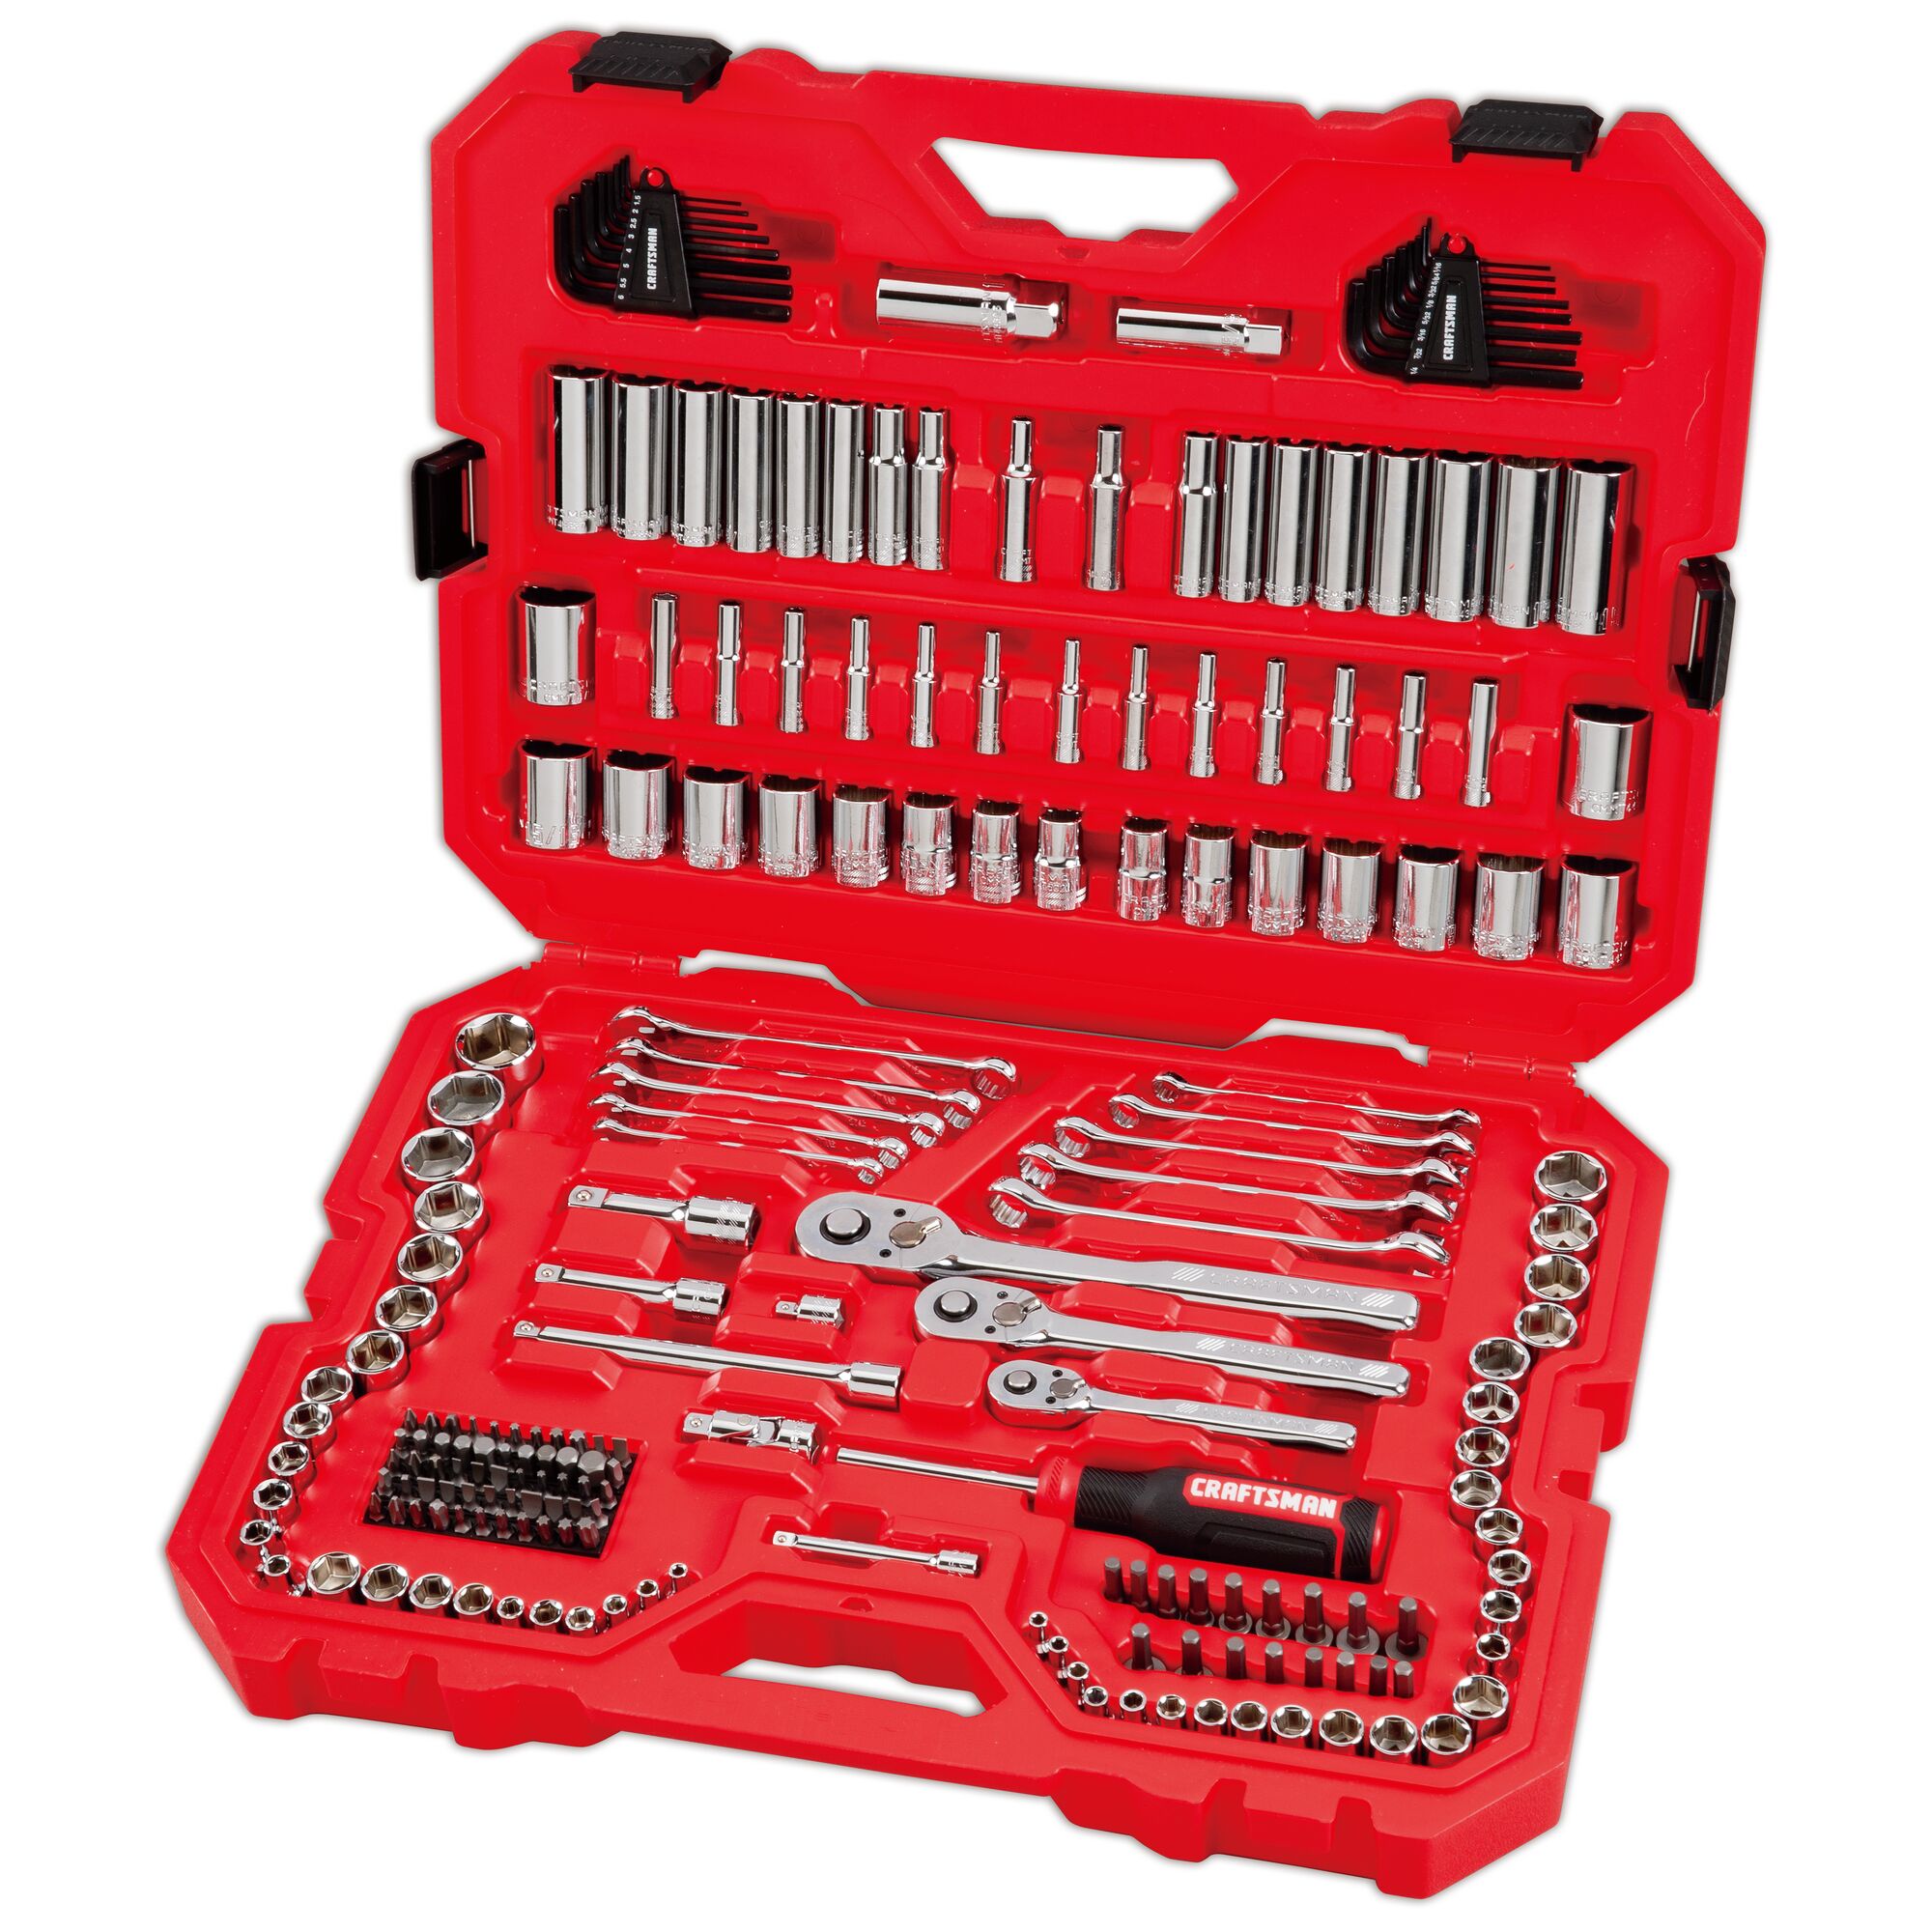 CRAFTSMAN  206-Piece Polished Chrome Mechanics Tool Set (1/4-in; 3/8-in; 1/2-in;) $99.99